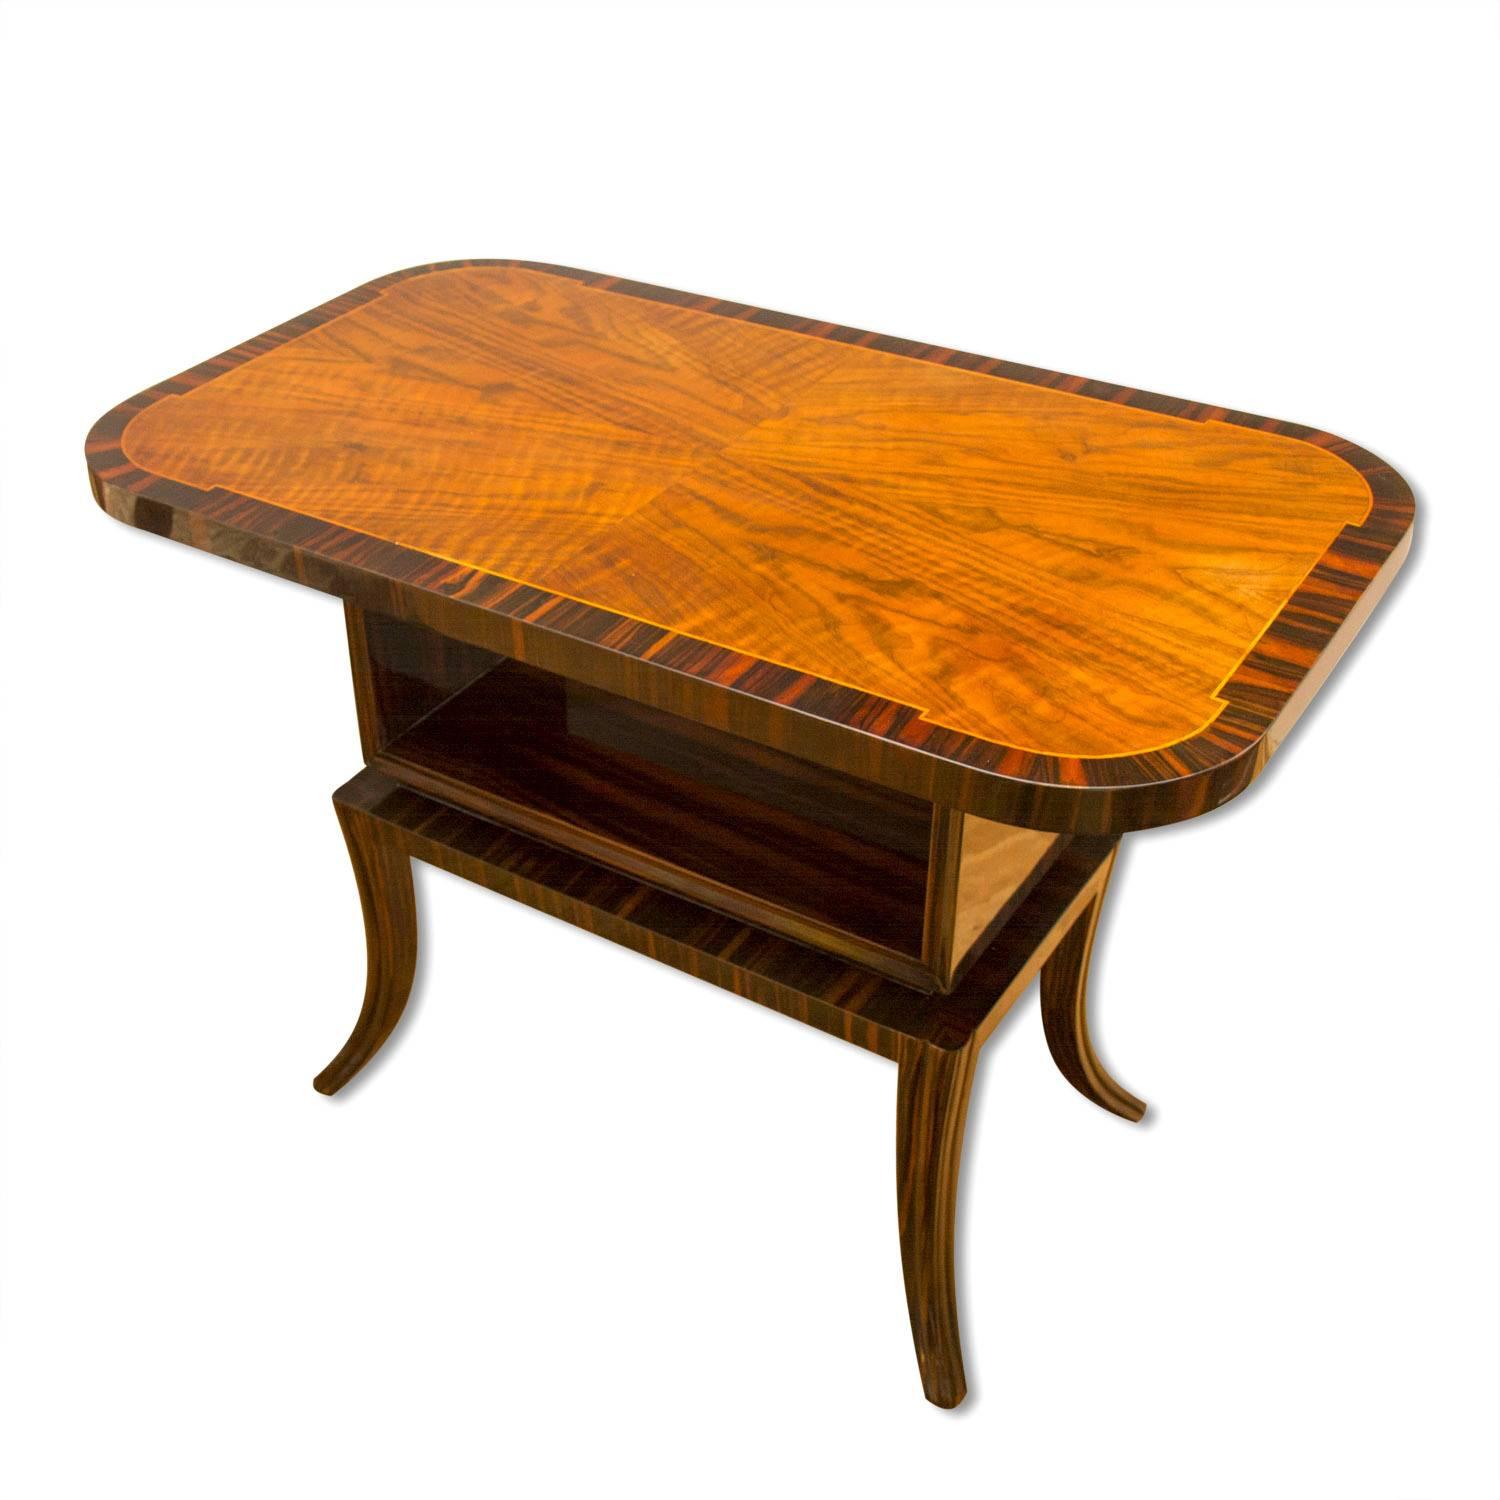 Macassar Ebony and Walnut Coffee Table, 1930s, Central Europe For Sale 1